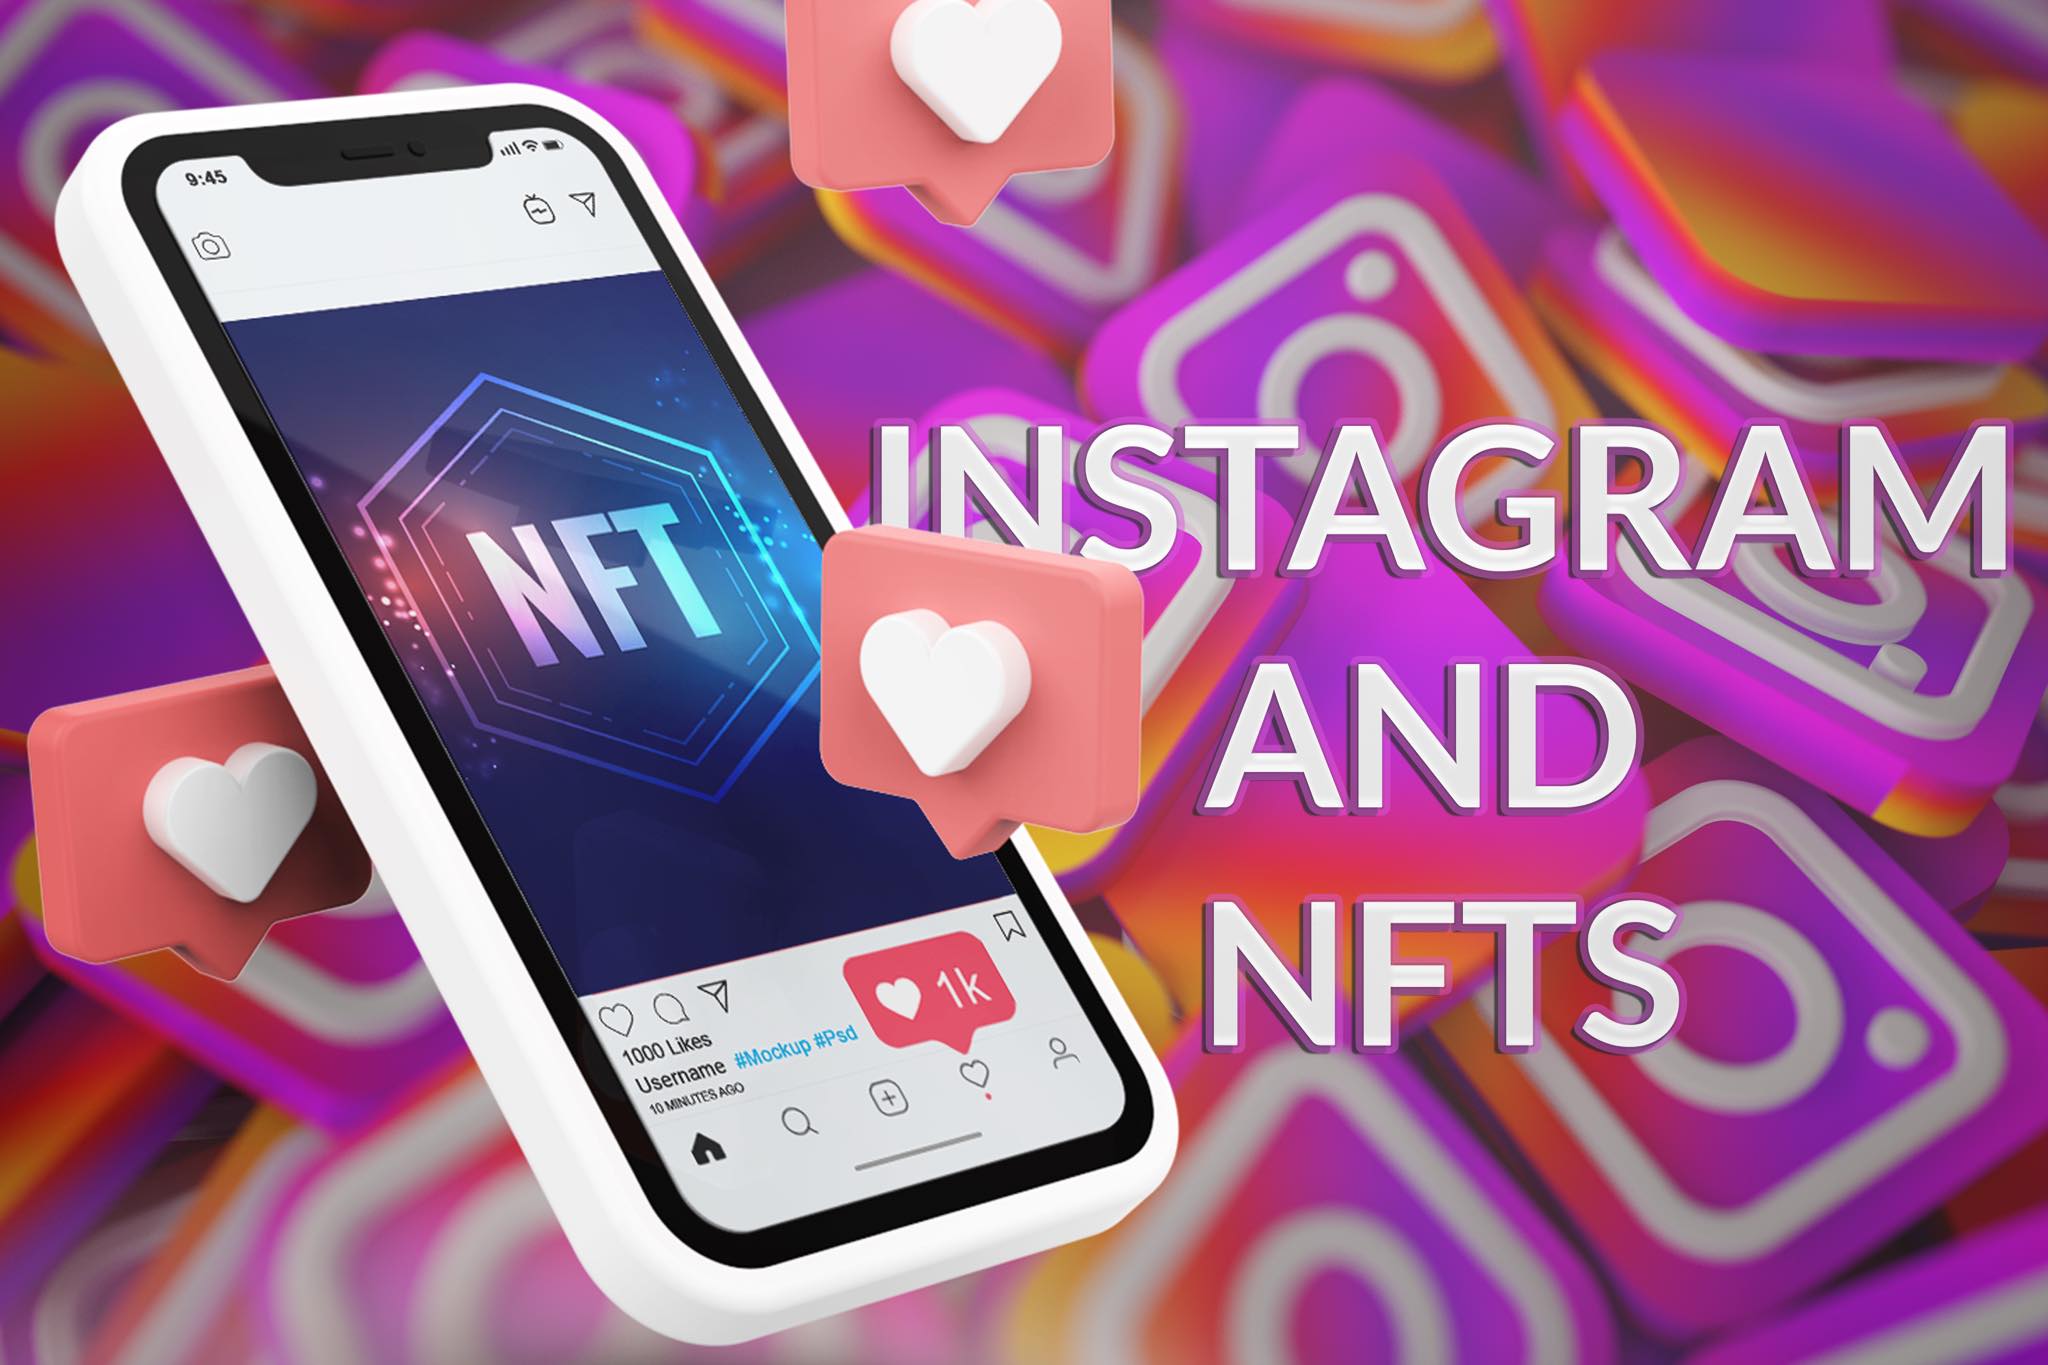 Instagram NFTs Integration — The First Signs of Meta